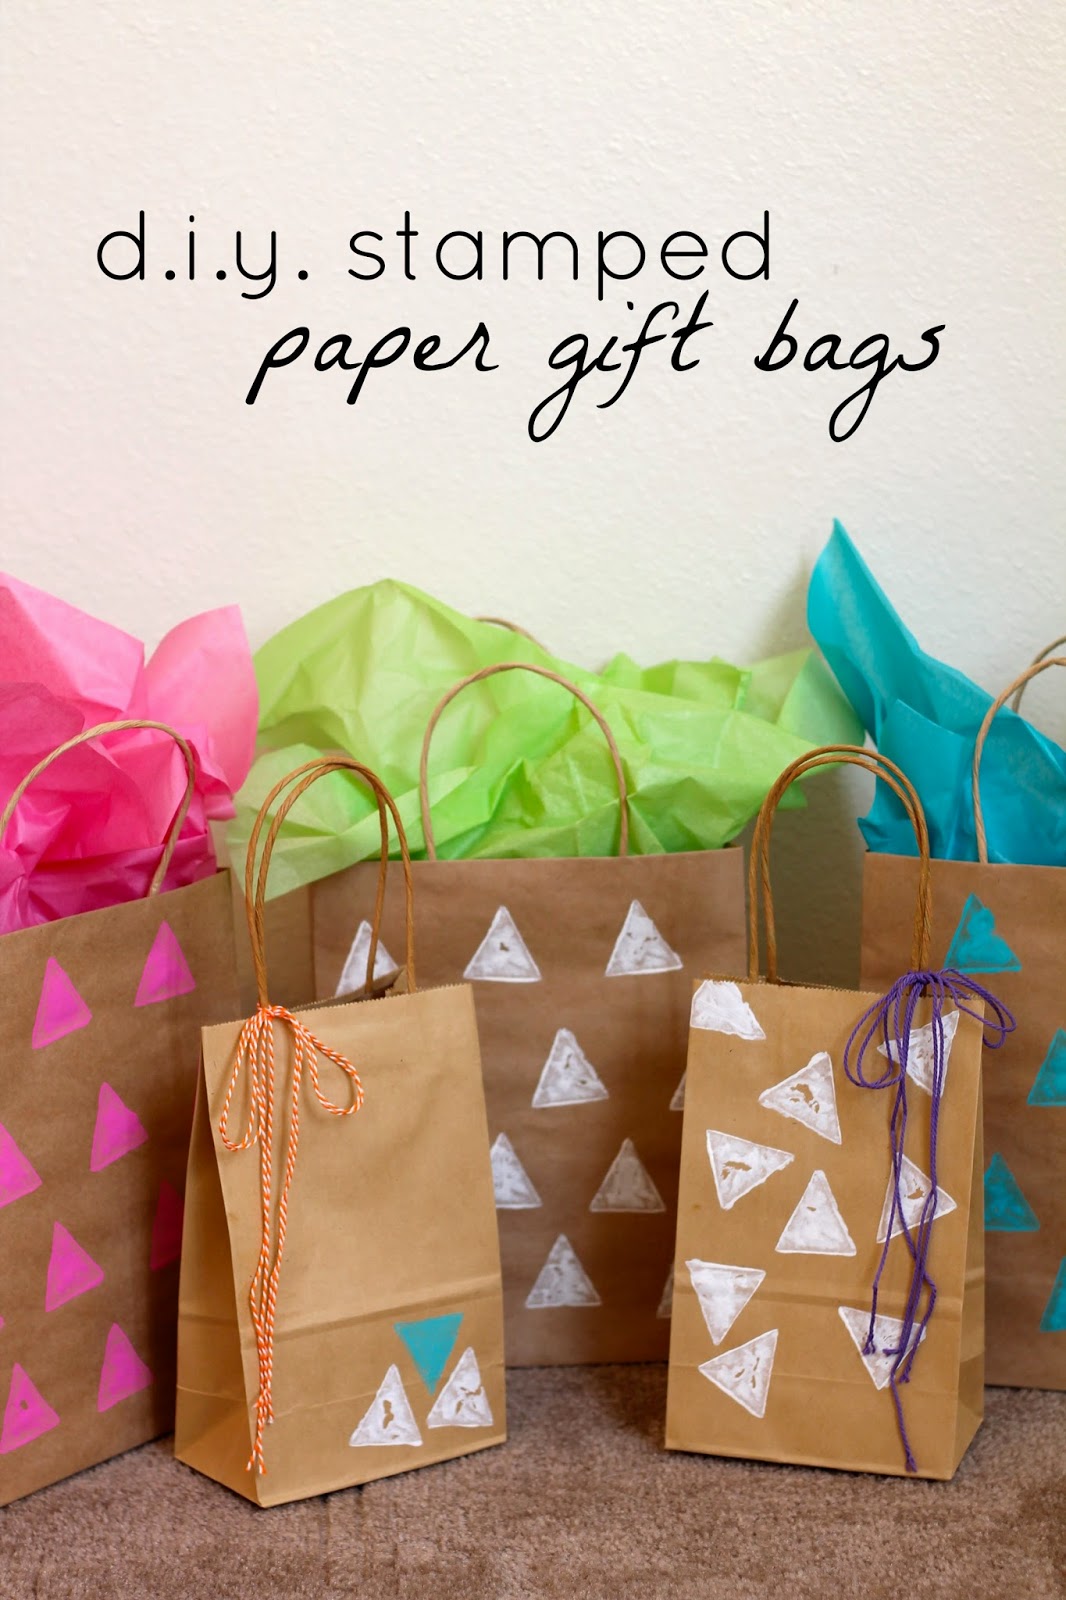 Silver Lining: I'm terrible at gift giving (diy stamped paper gift bags)